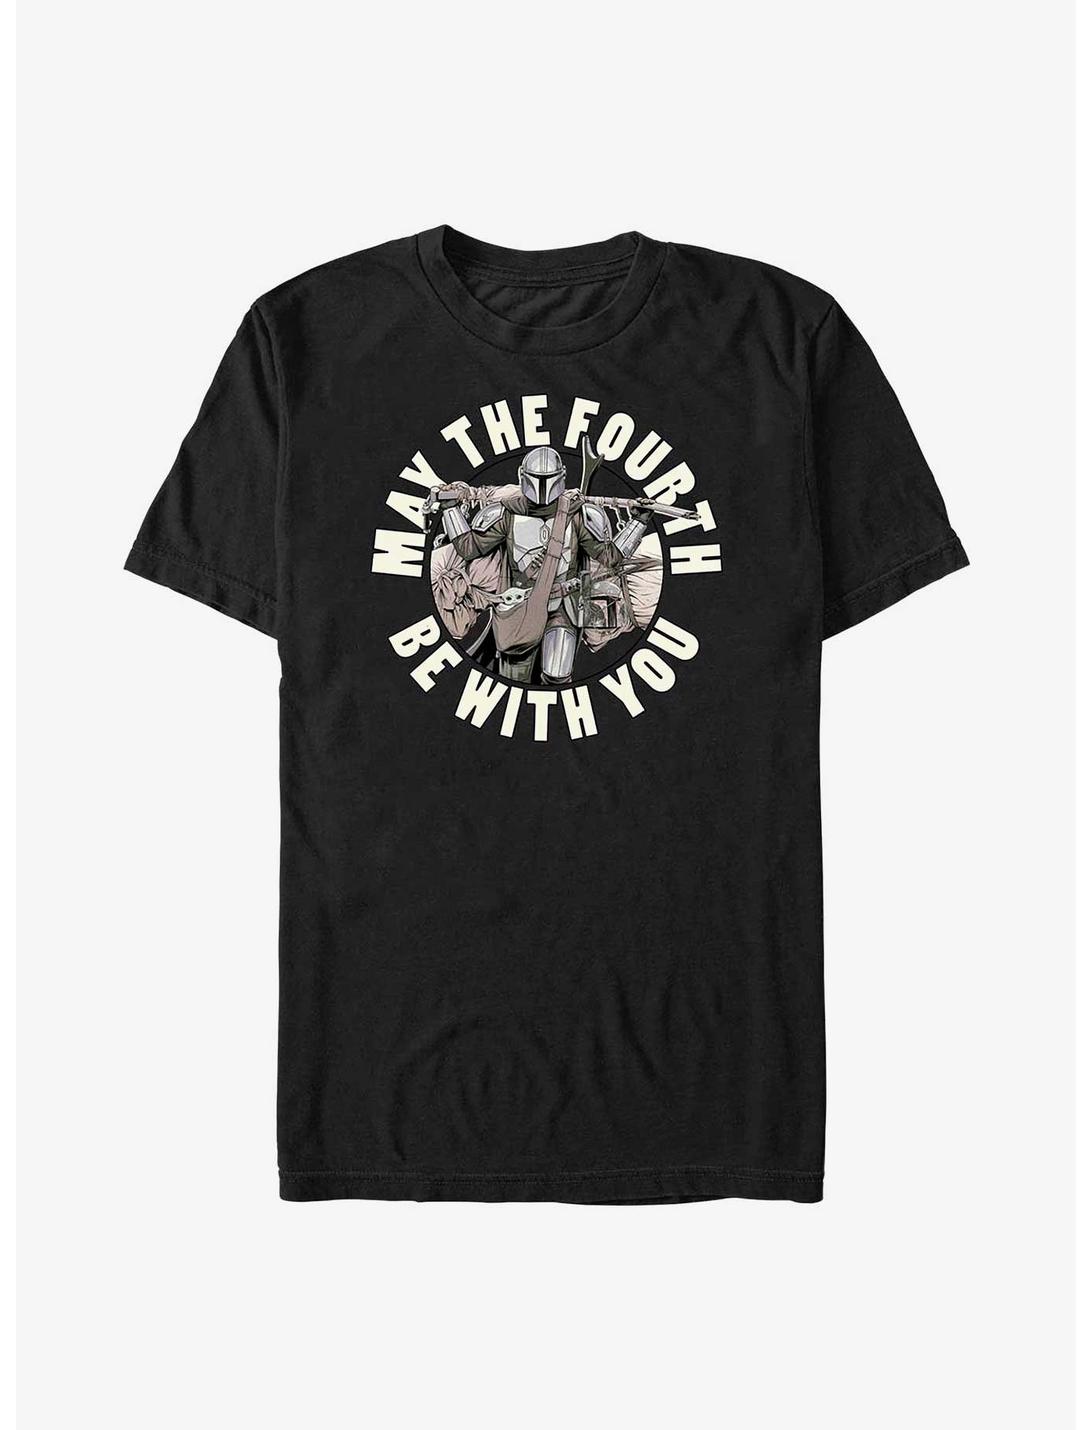 Star Wars The Mandalorian May The Fourth Be With You T-Shirt, BLACK, hi-res